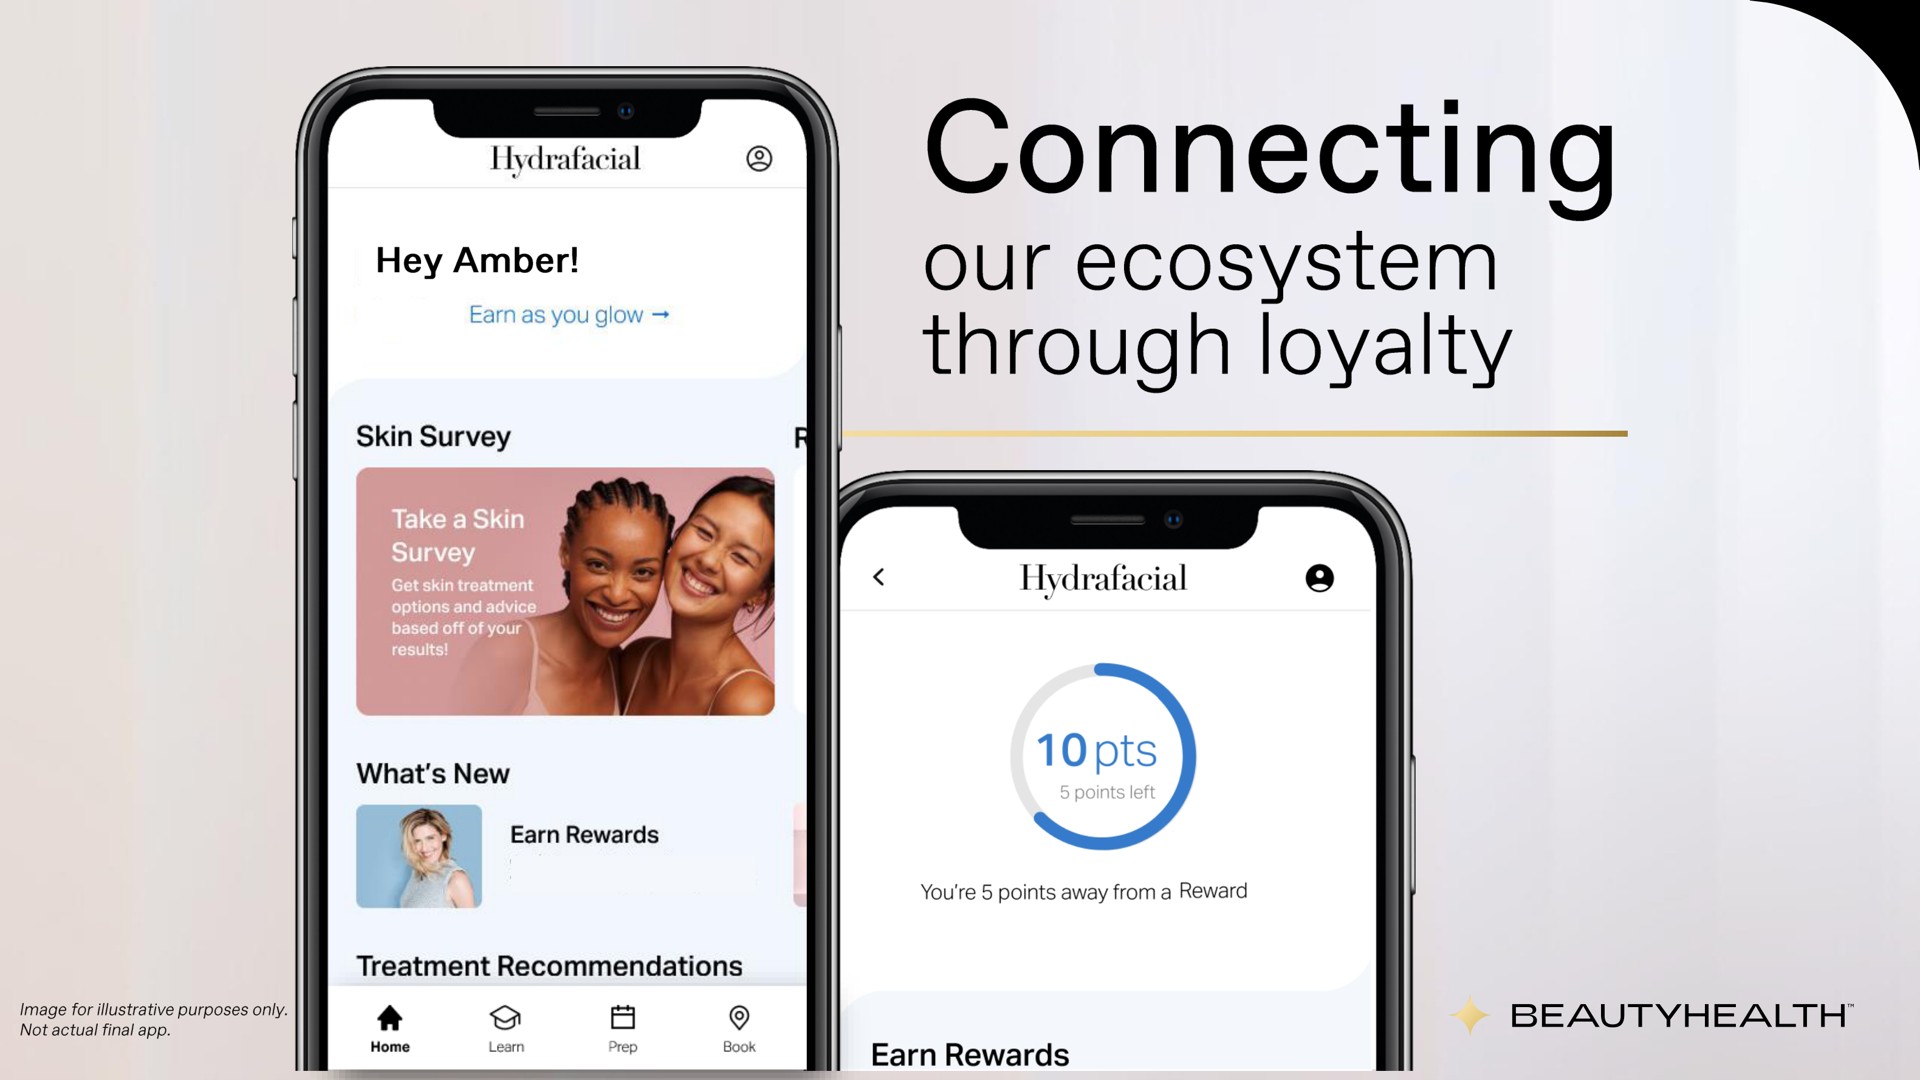 connecting our ecosystem through loyalty | Hydrafacial